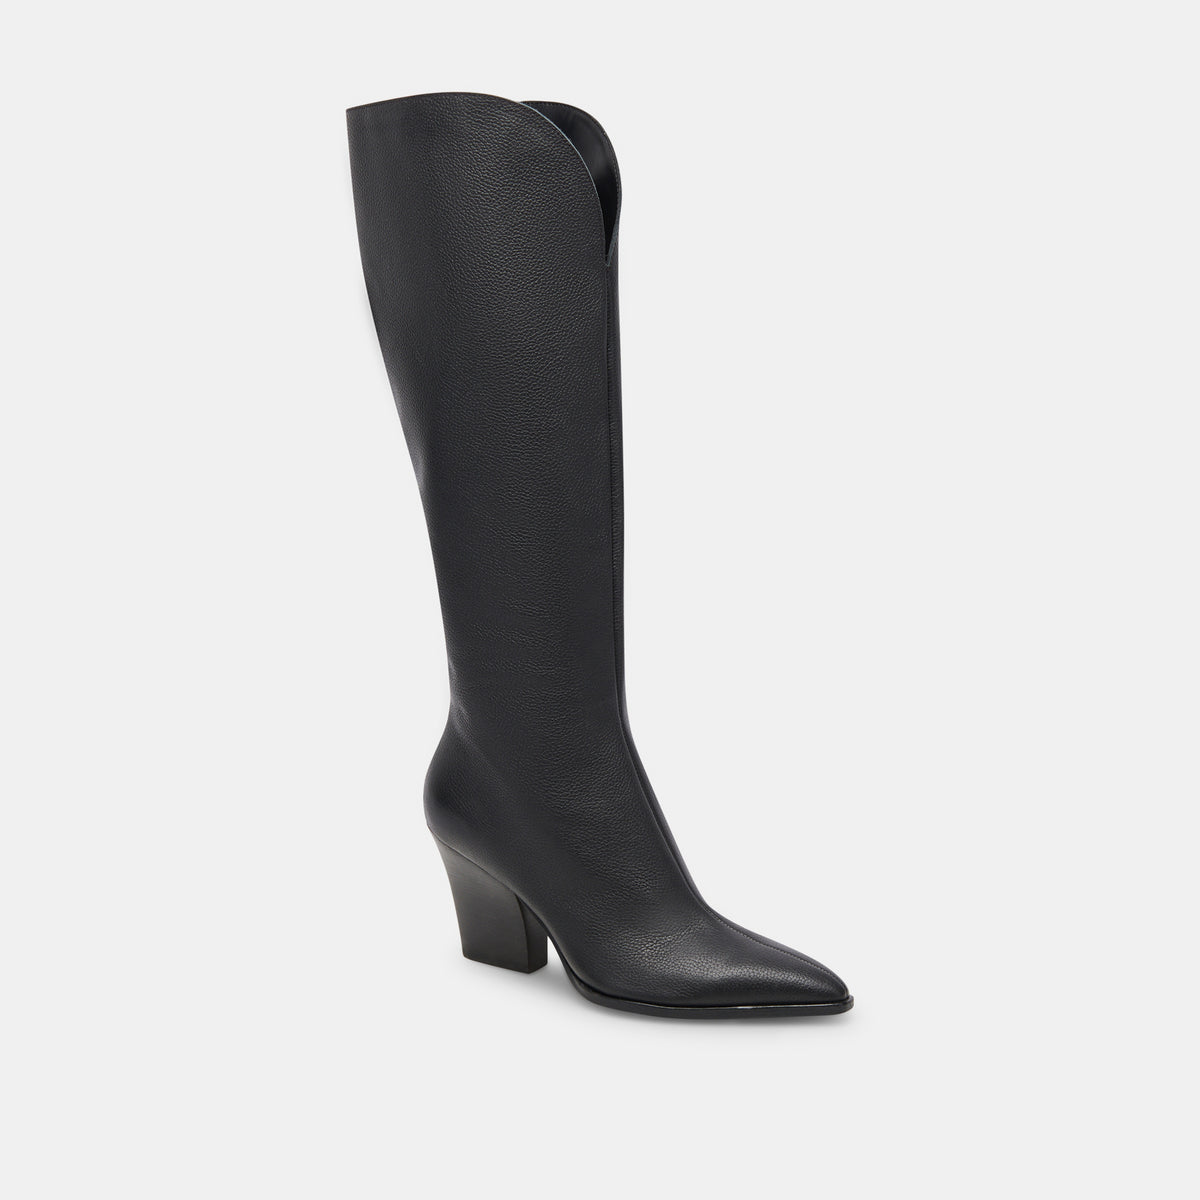 Rocky Boots Black Leather | Black Leather Knee-High Boots – Dolce Vita